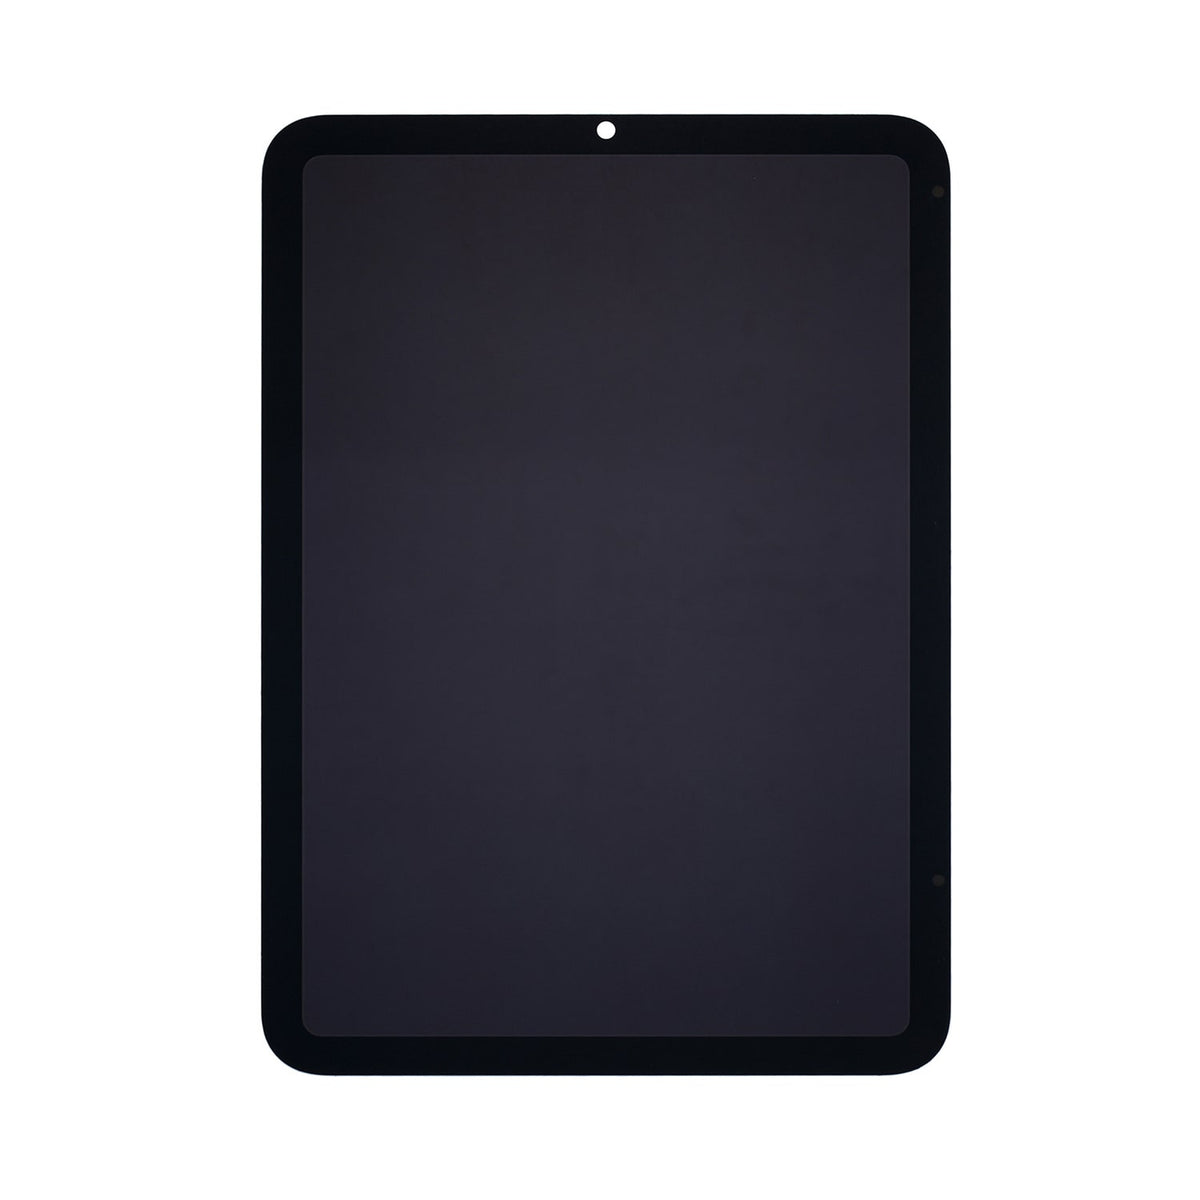 LCD WITH DIGITIZER ASSEMBLY FOR IPAD MINI 6 - BLACK